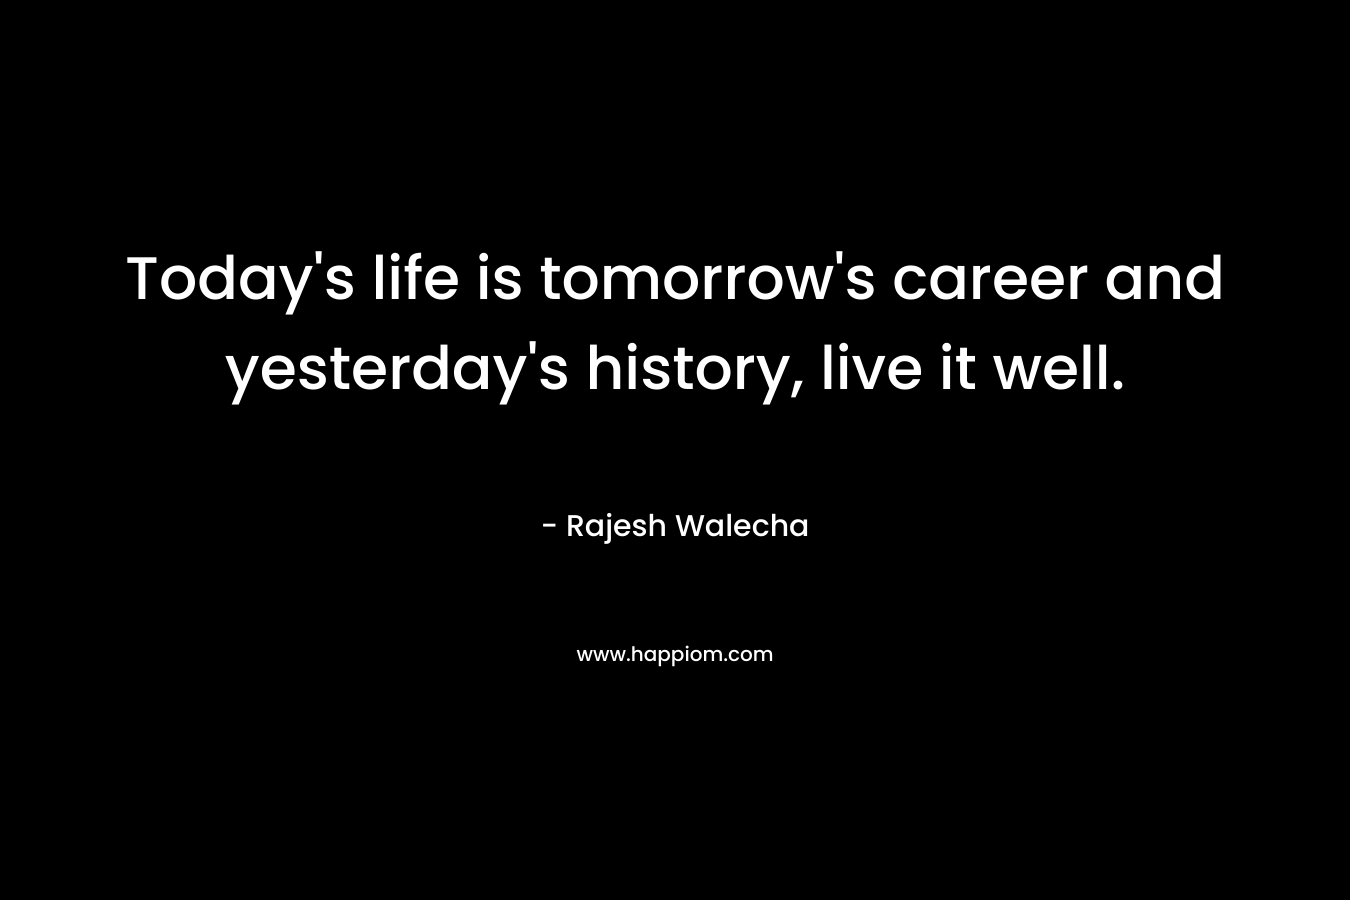 Today’s life is tomorrow’s career and yesterday’s history, live it well. – Rajesh Walecha